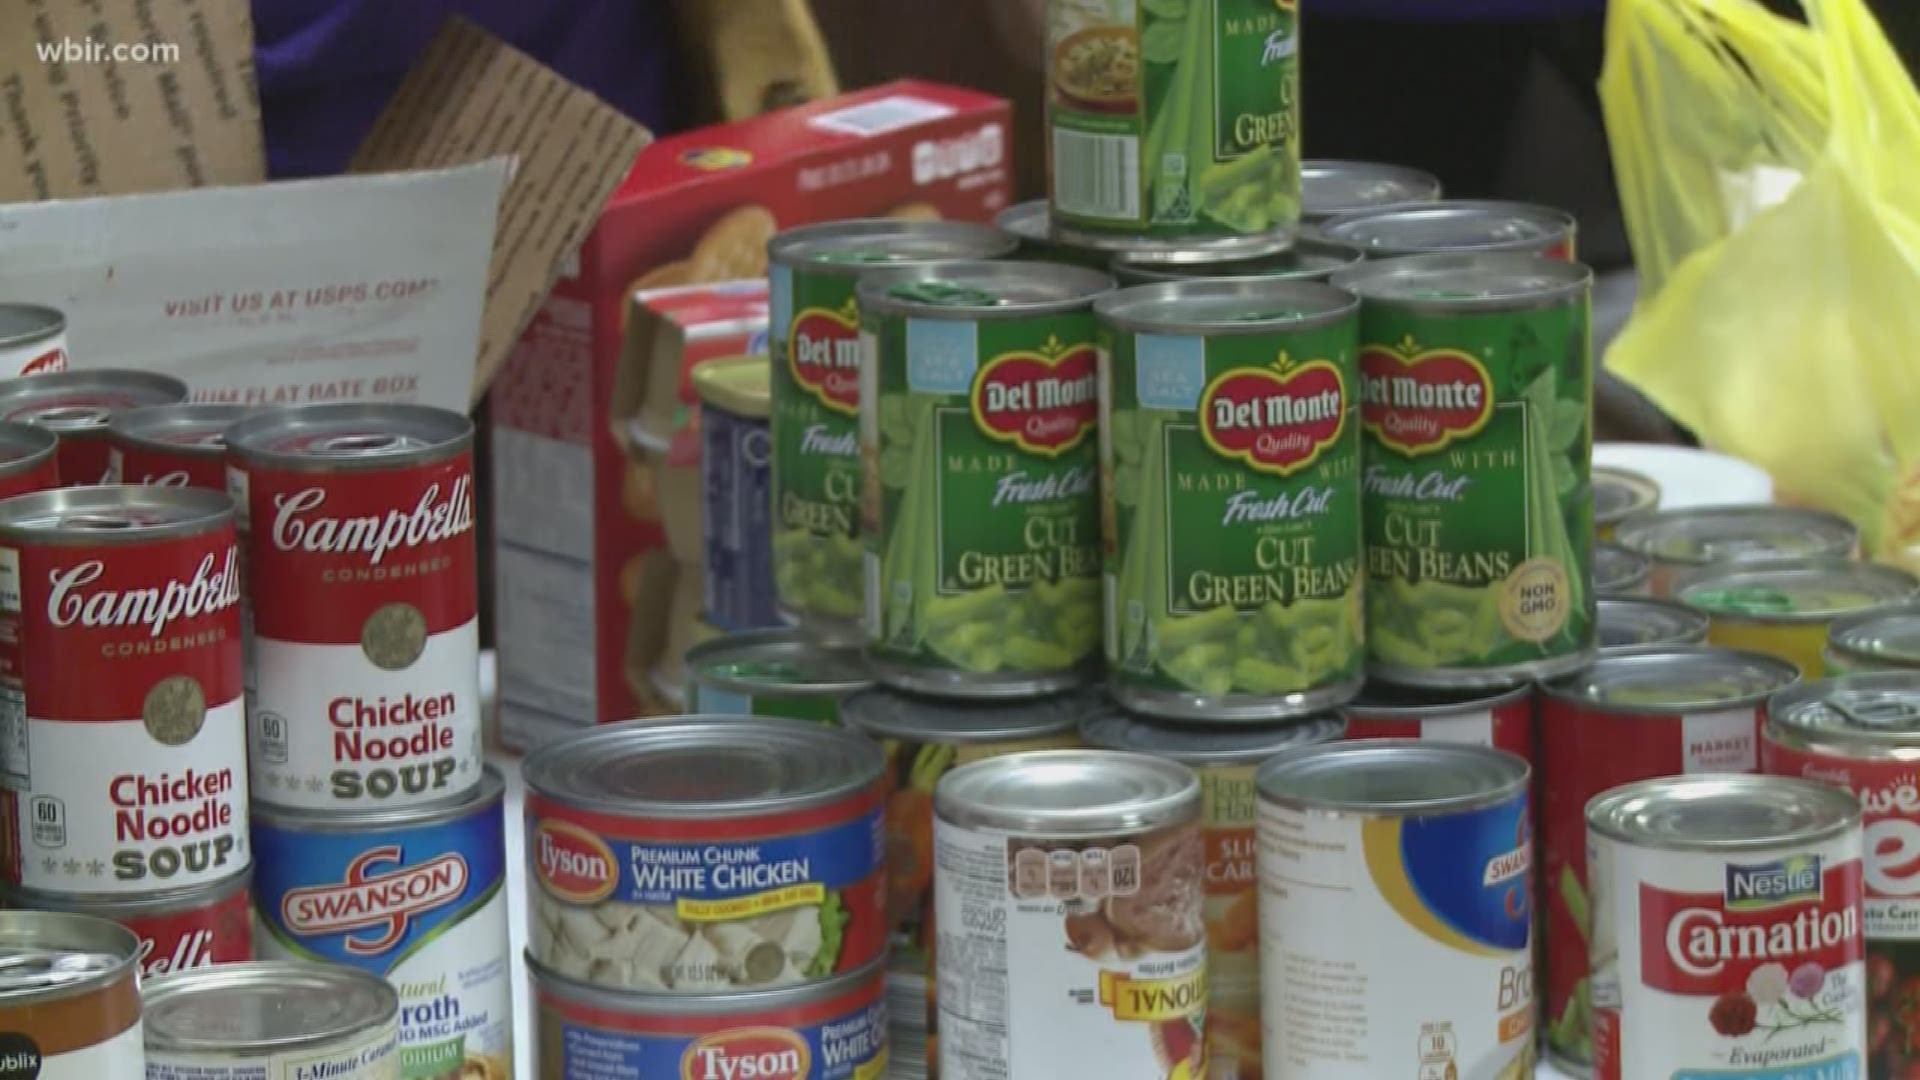 Churches from all around the United States will raise money and collect nonperishable food items for the hungry.